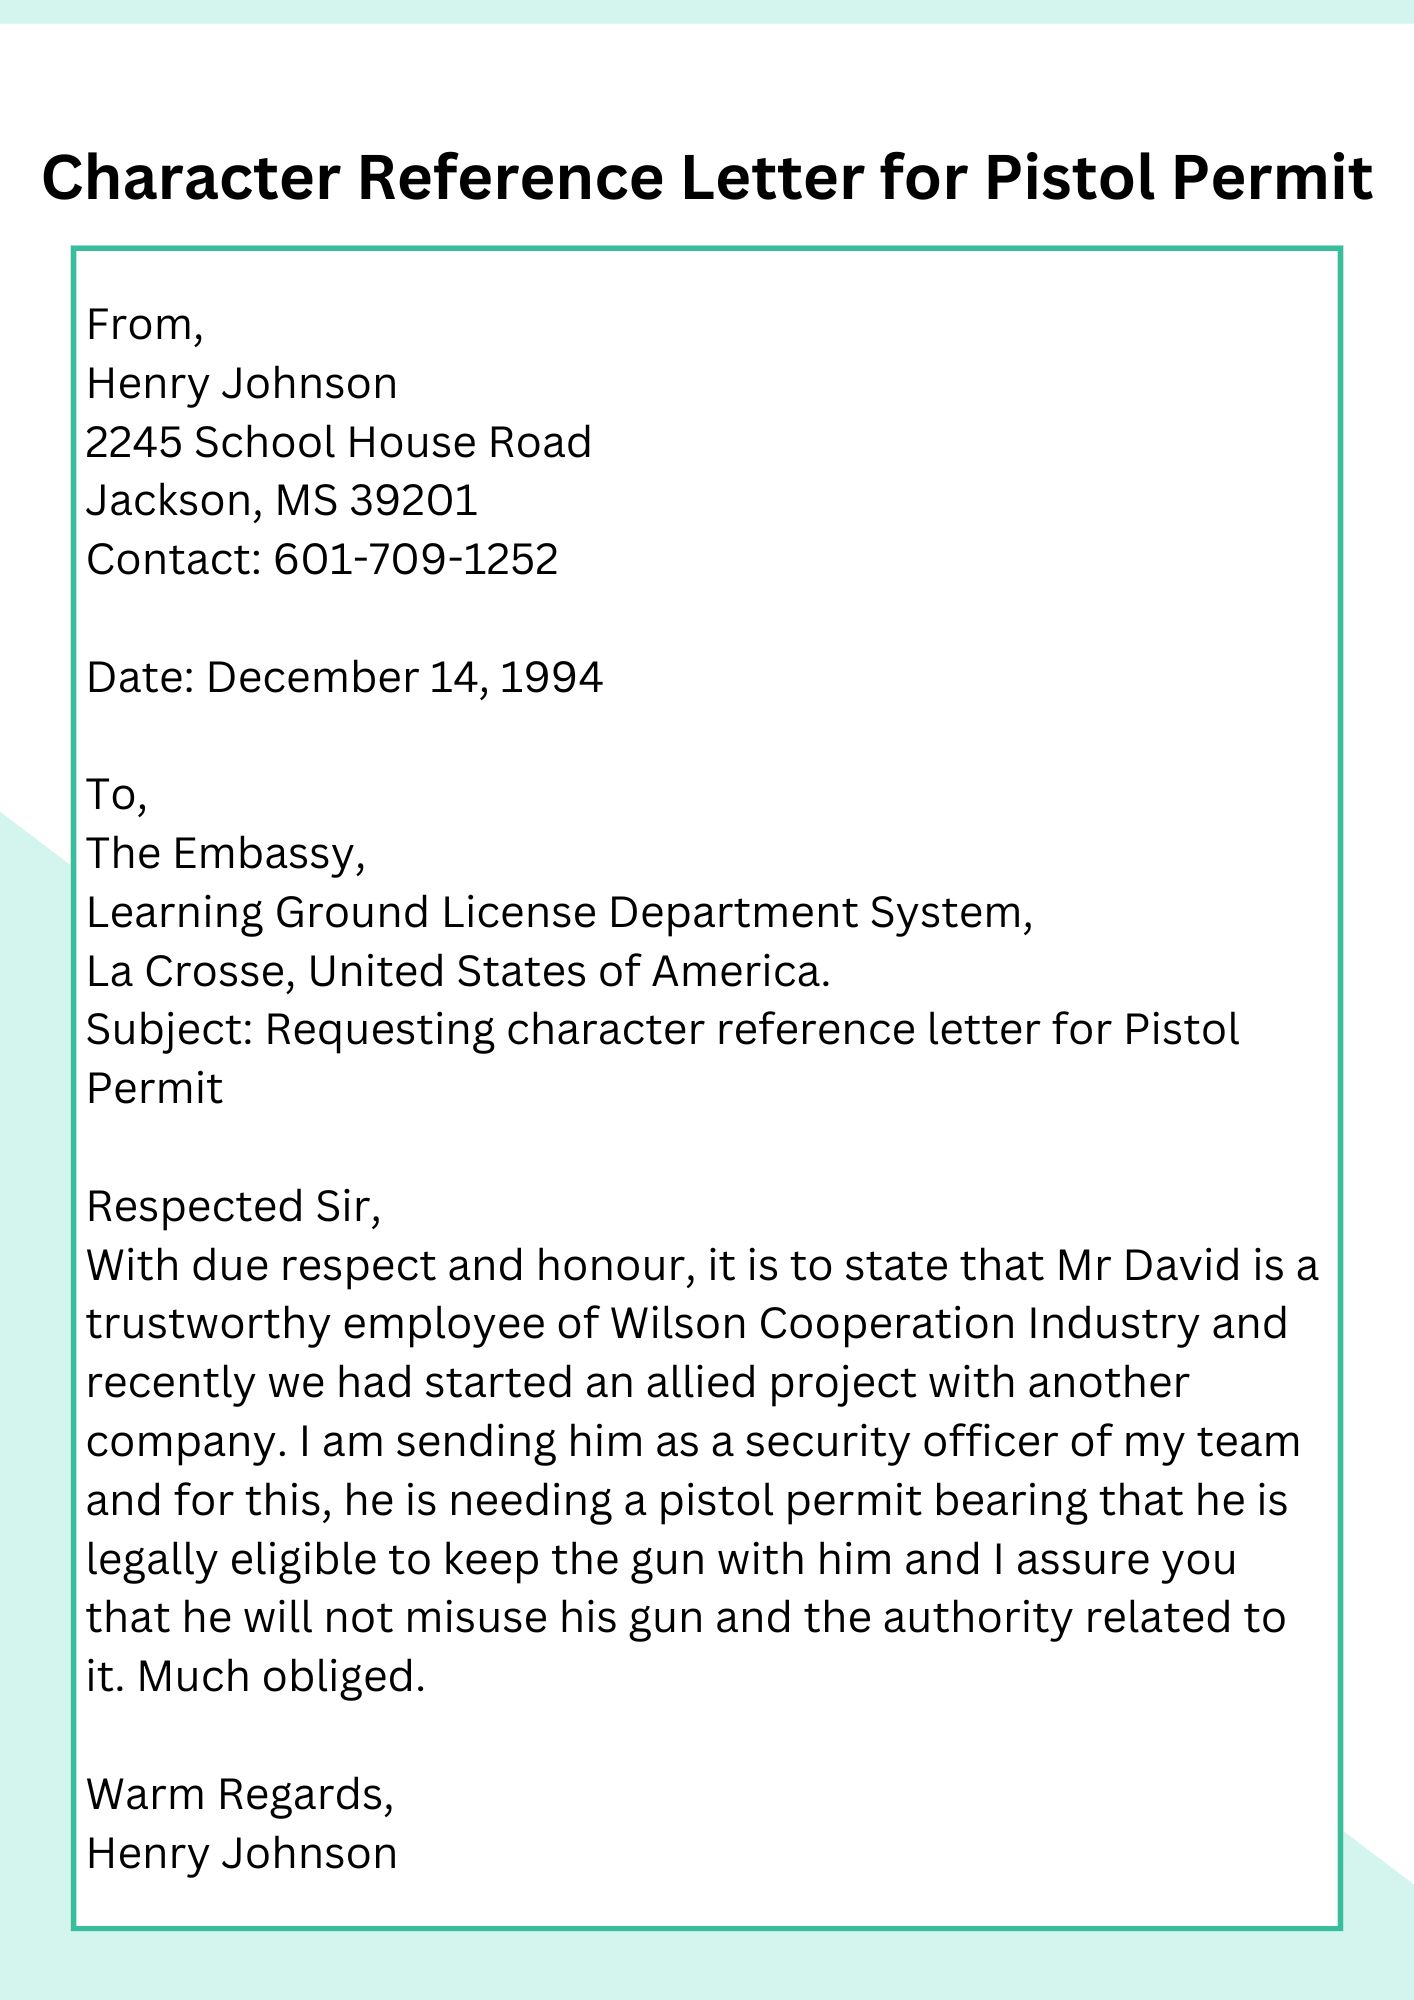 Pistol Permit Character Reference Letter Template 